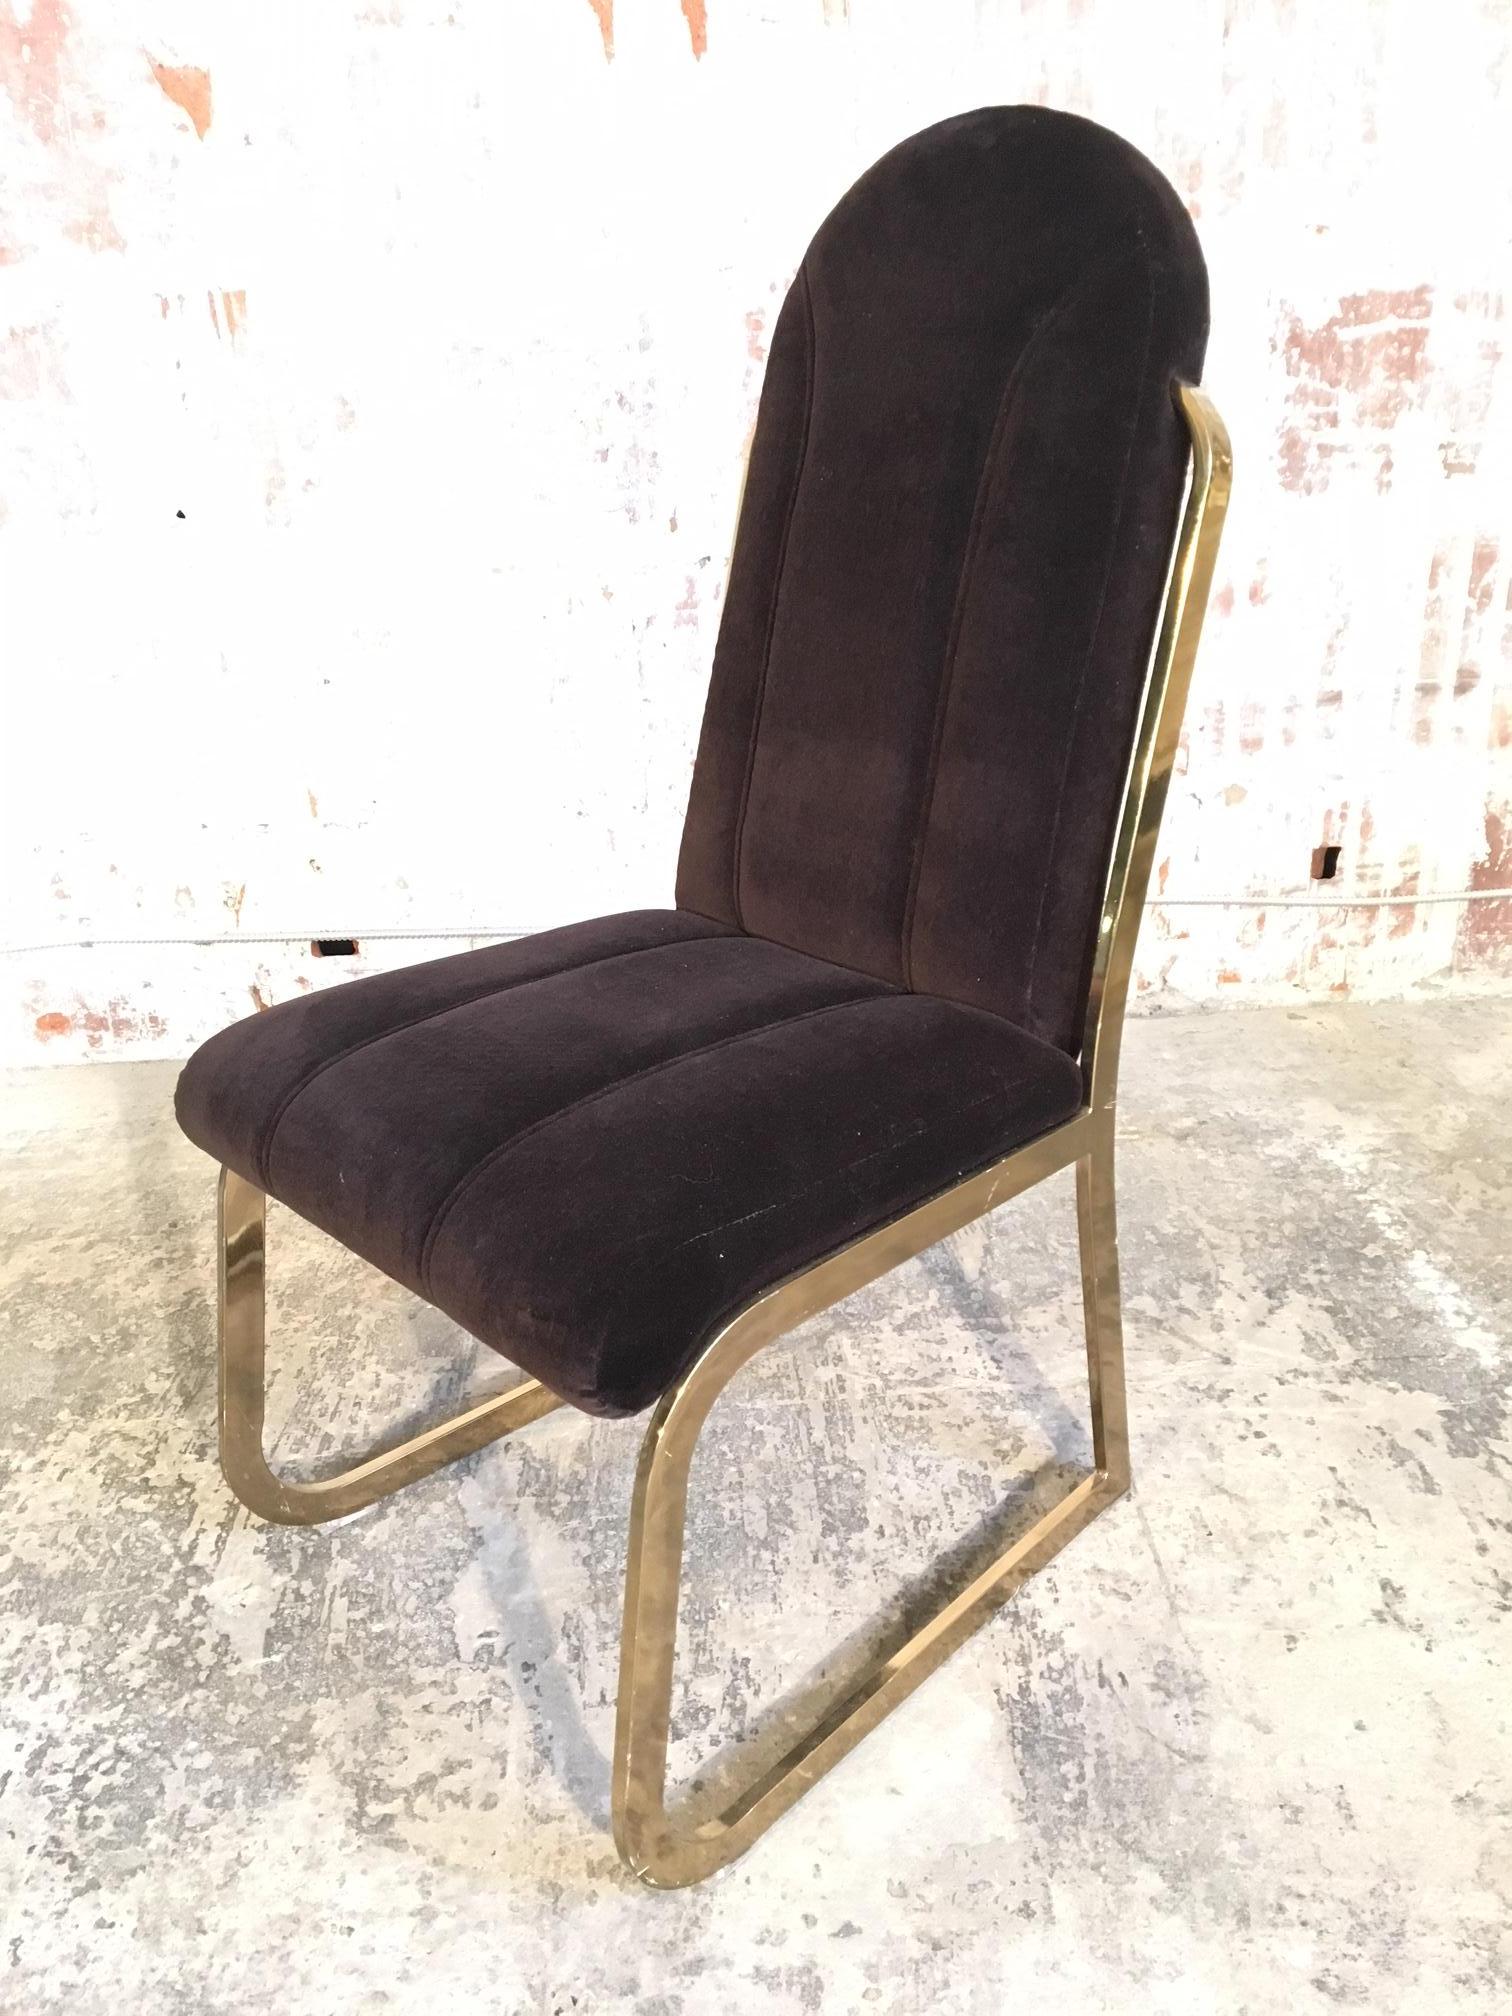 Set of 6 vintage Chromcraft dining chairs in the manor of Milo Baughman feature a heavy brass frame and brown velvet upholstery. Thick and comfortable seat and back with accent stitching. Excellent vintage condition. Brass has minor marks consistent